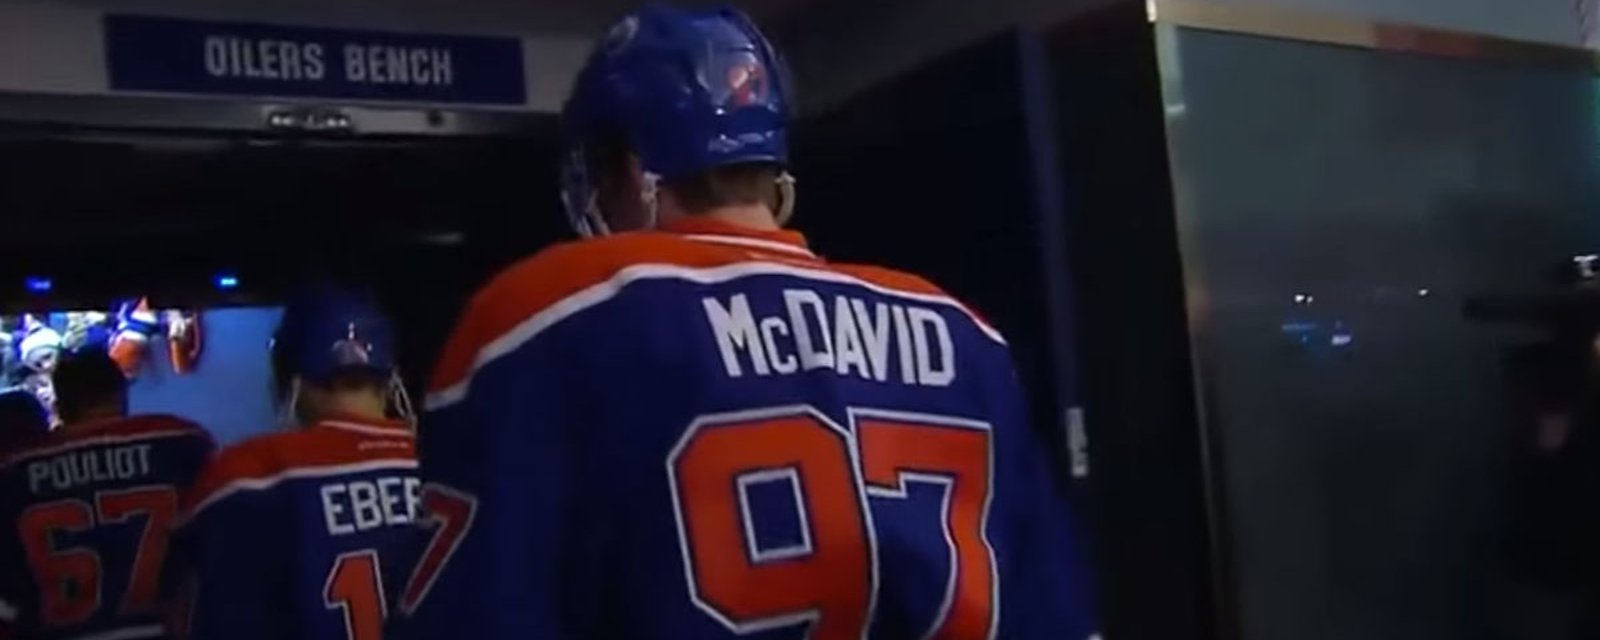 Must See: Connor McDavid shows everyone why he is the best player on Earth!